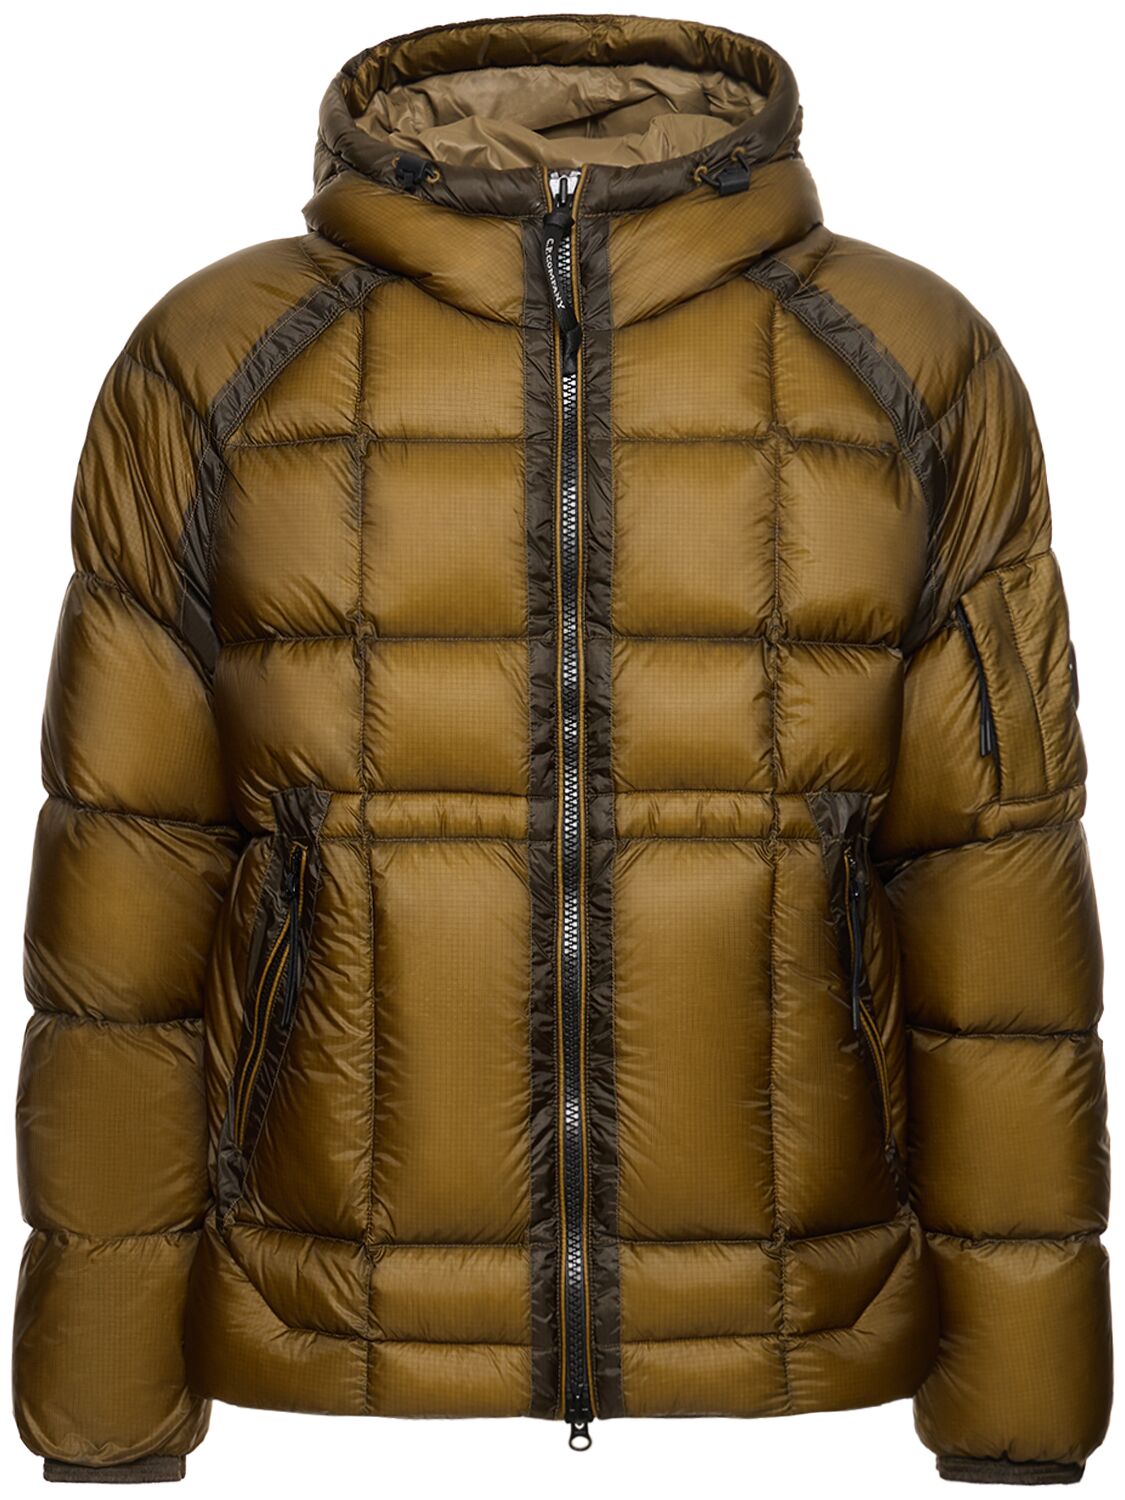 D.d.shell Hooded Down Jacket – MEN > CLOTHING > DOWN JACKETS